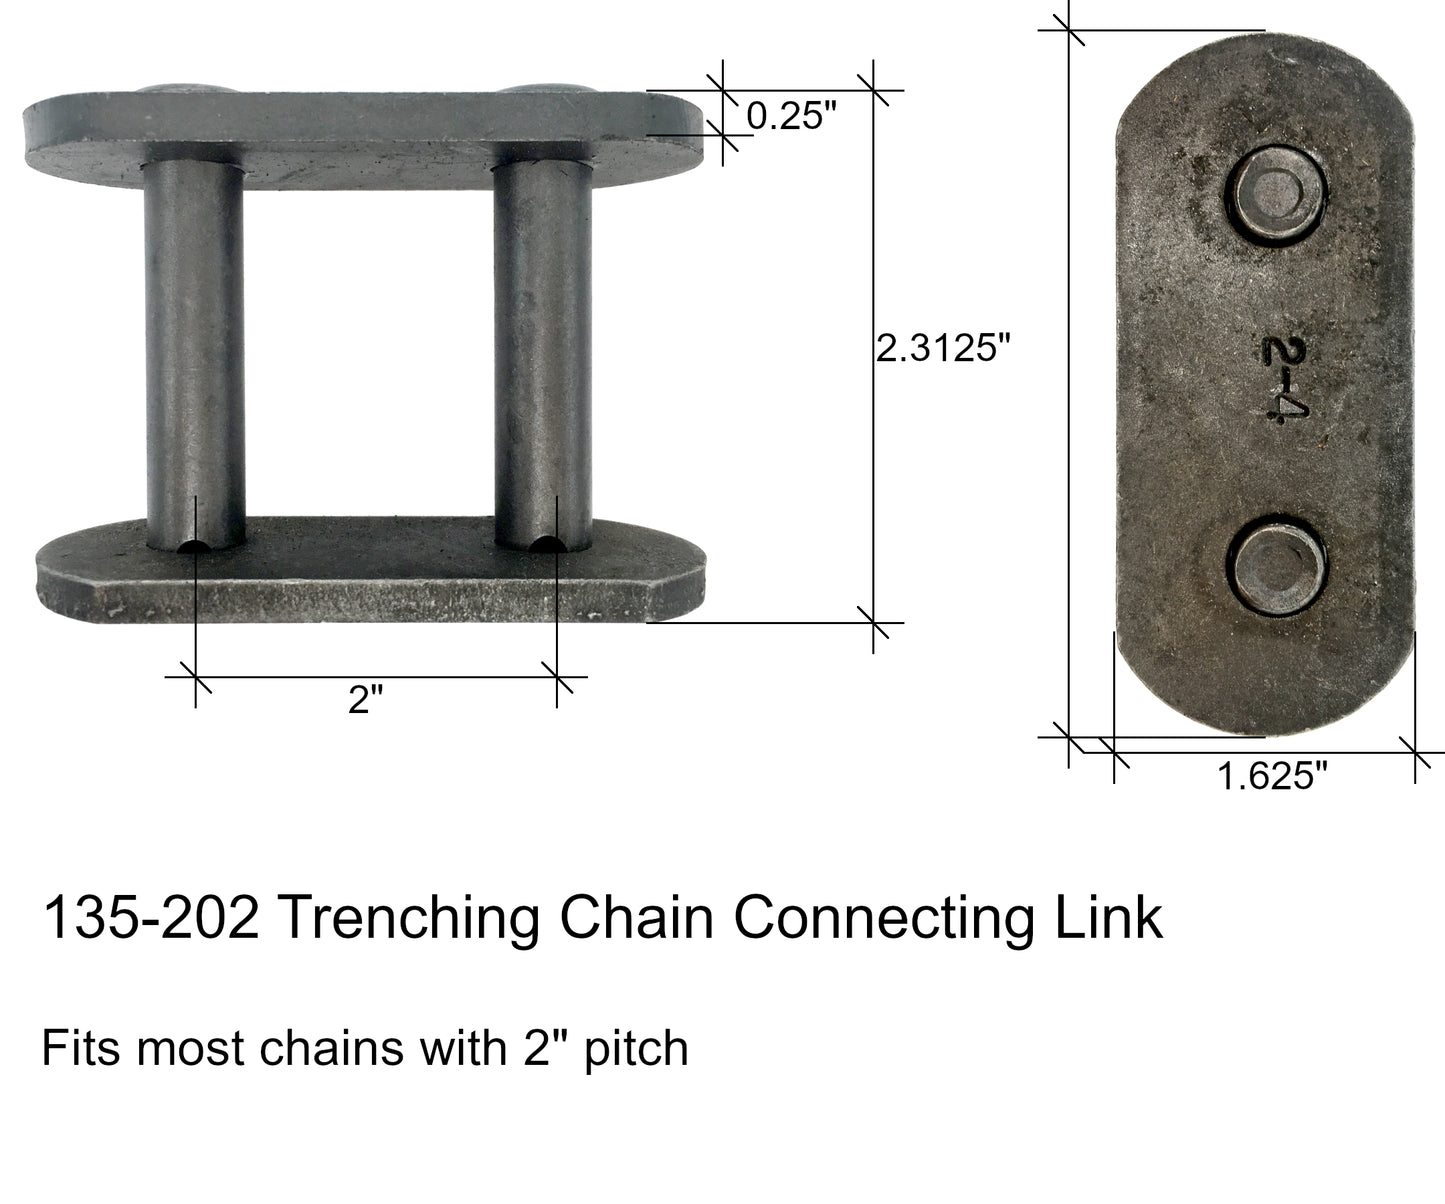 Trenching Chain Connecting Link, Fits most 2" pitch Chains - 135-202, 200CL